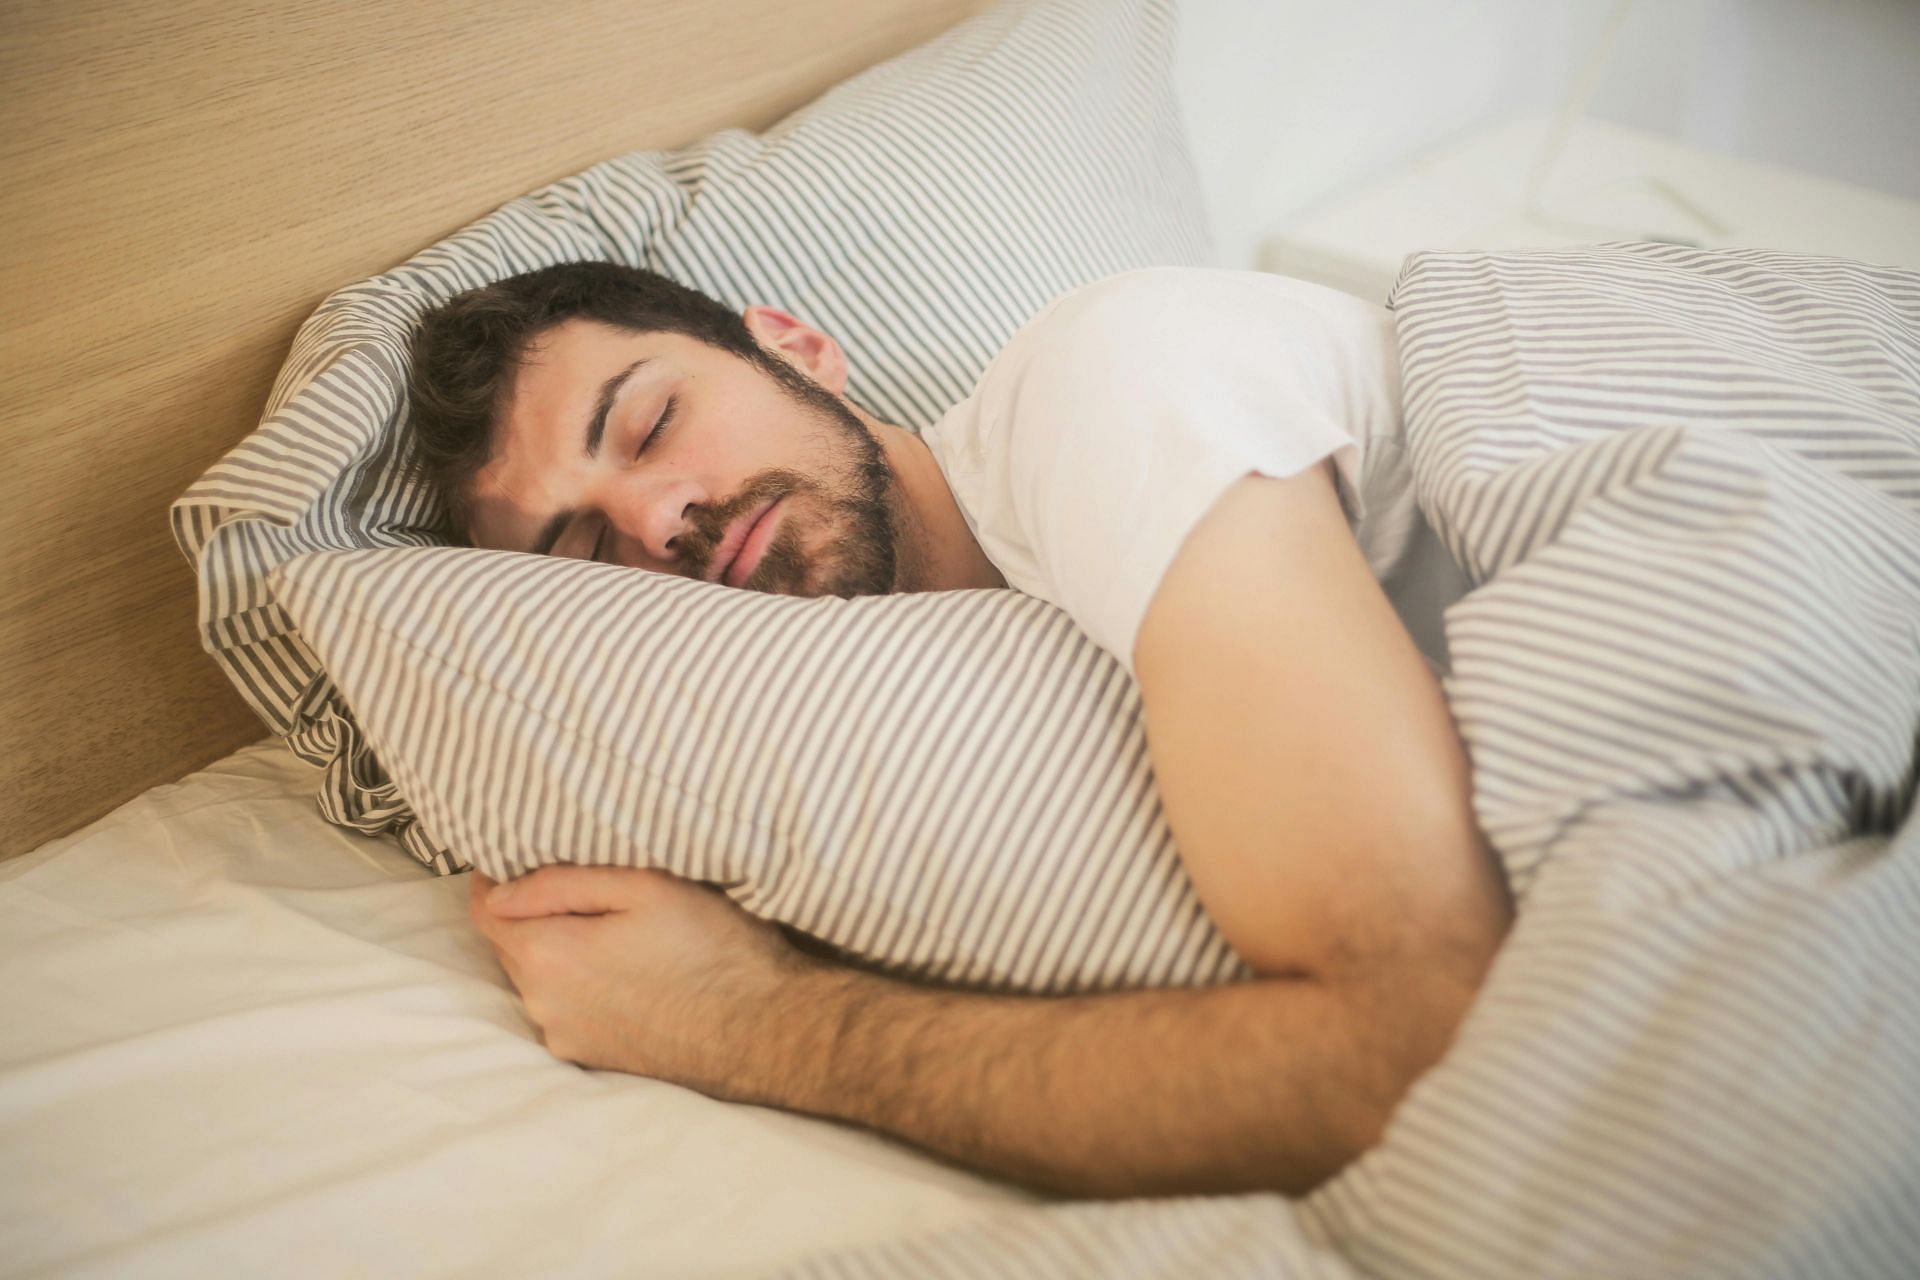 Importance of diet and sleep (image sourced via Pexels / Photo by Andrea)